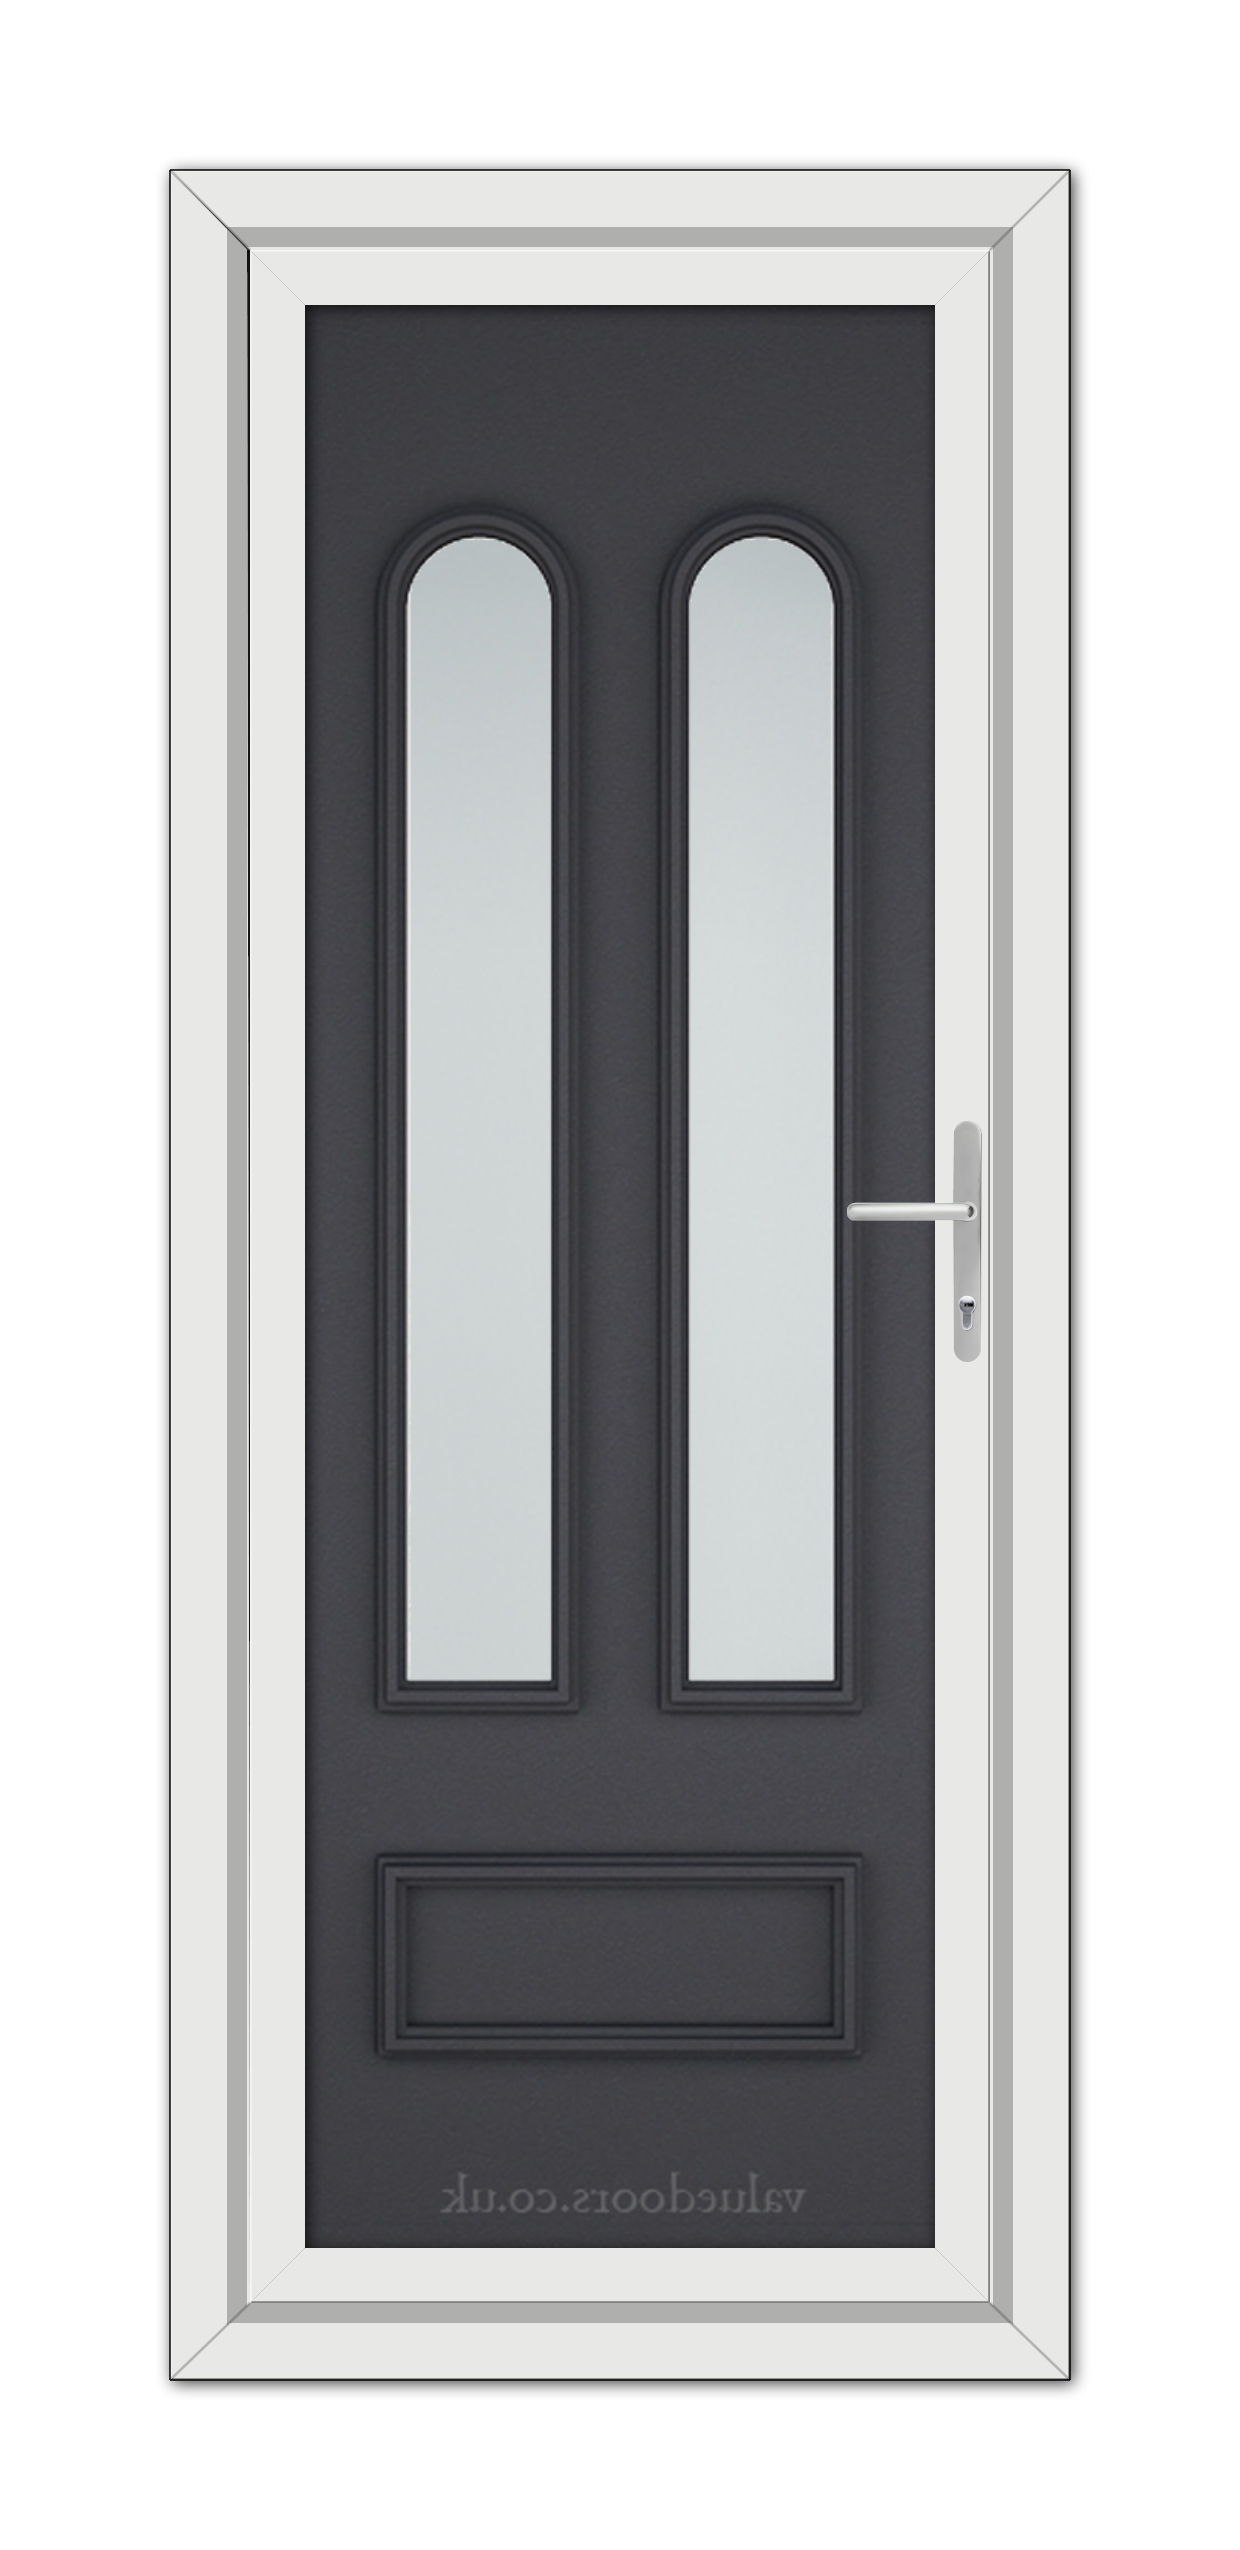 Modern Grey Grained Madrid uPVC Door with double vertical frosted glass panels and white frame, featuring a silver handle on the right.